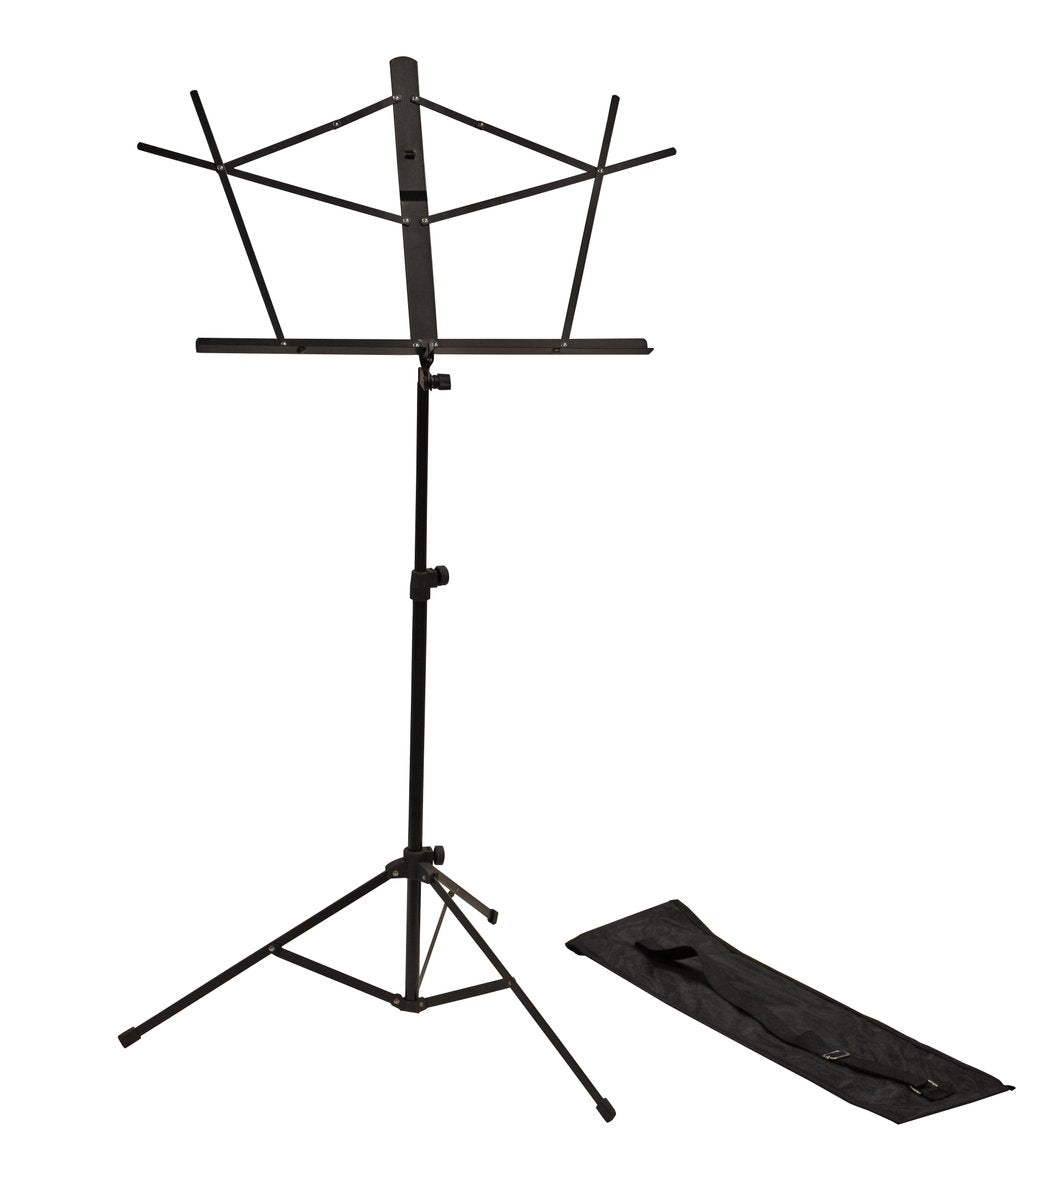 Rok-It Folding Sheet Music Stand with Detachable Bookplate; Leg Assembly Secures Into Place with a Locking Mechanism; Includes carry bag.